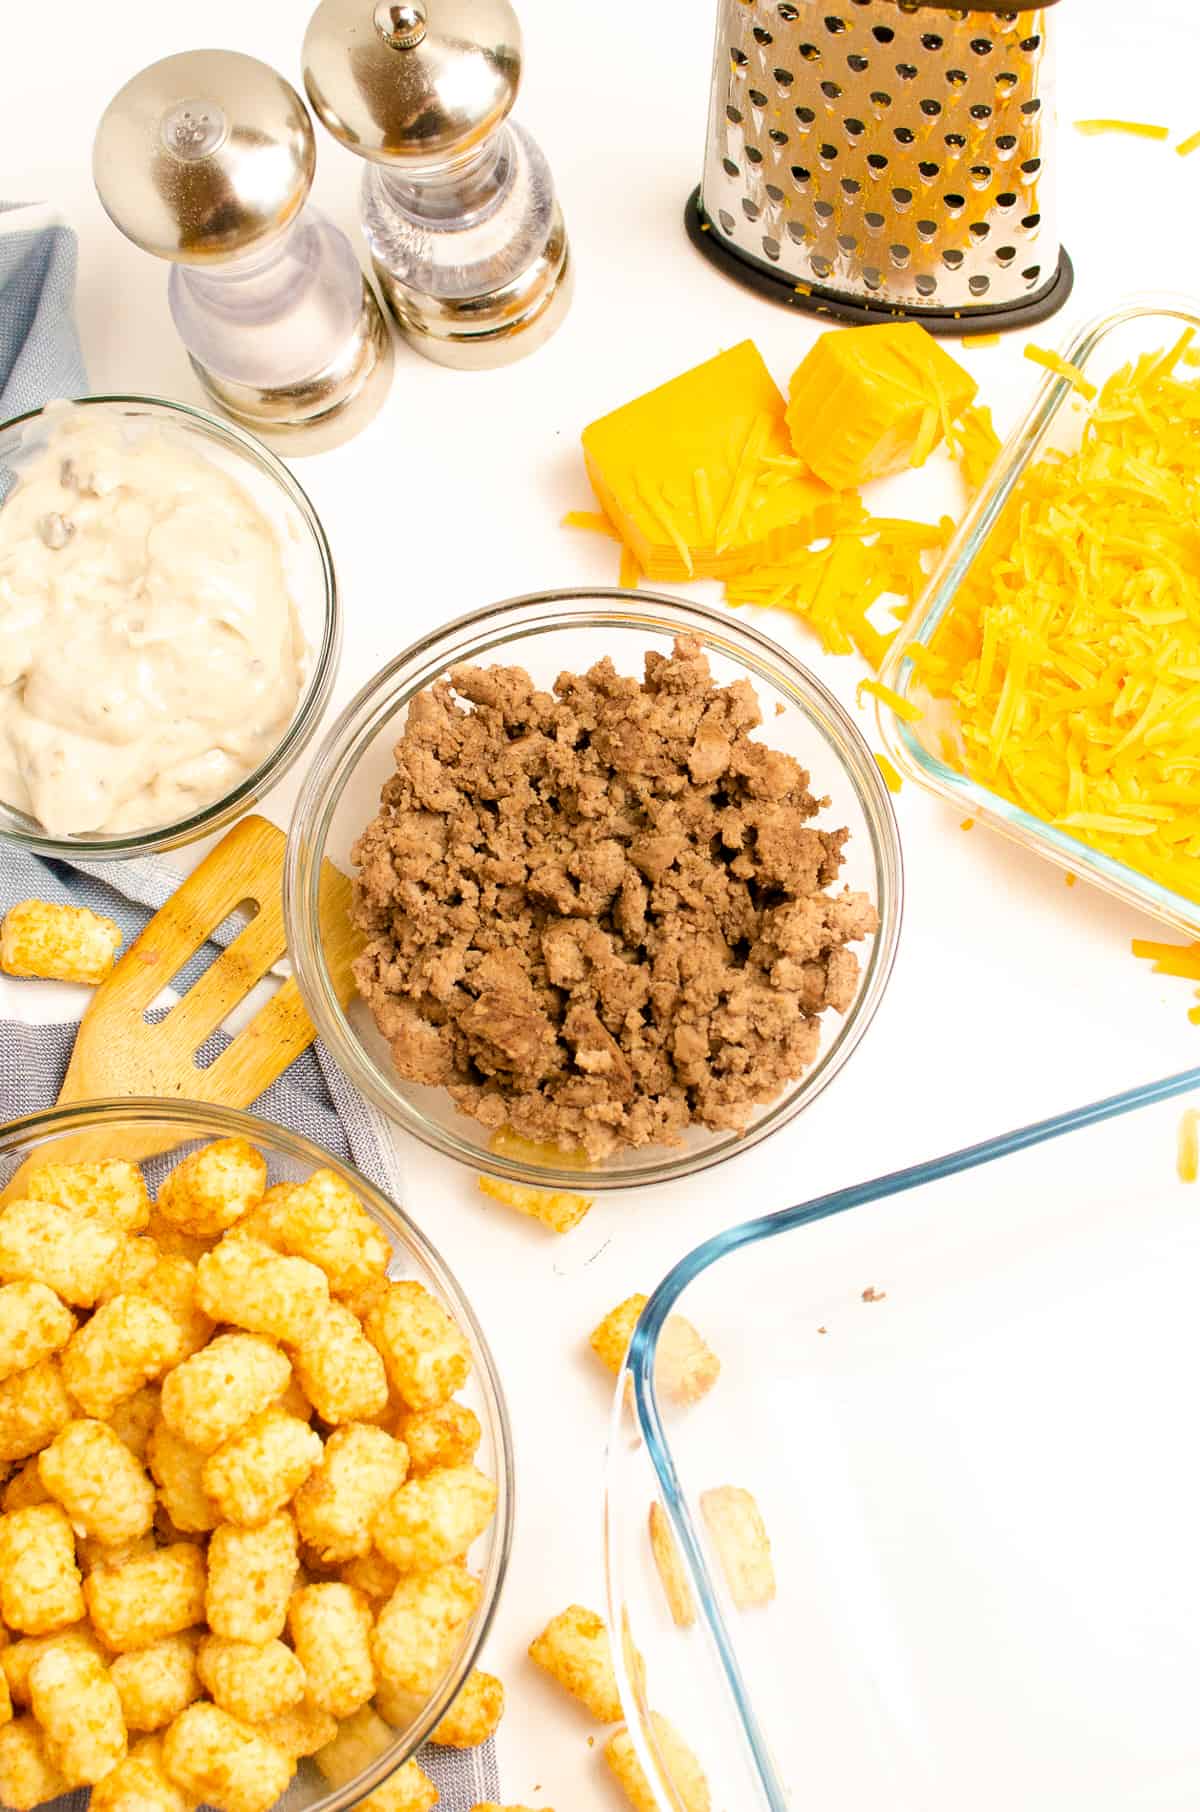 Ingredients in glass bowls: browned ground beef, cream of mushroom soup, cheddar cheese and cheese shredder, frozen tater tots, salt and pepper, and glass casserole dish